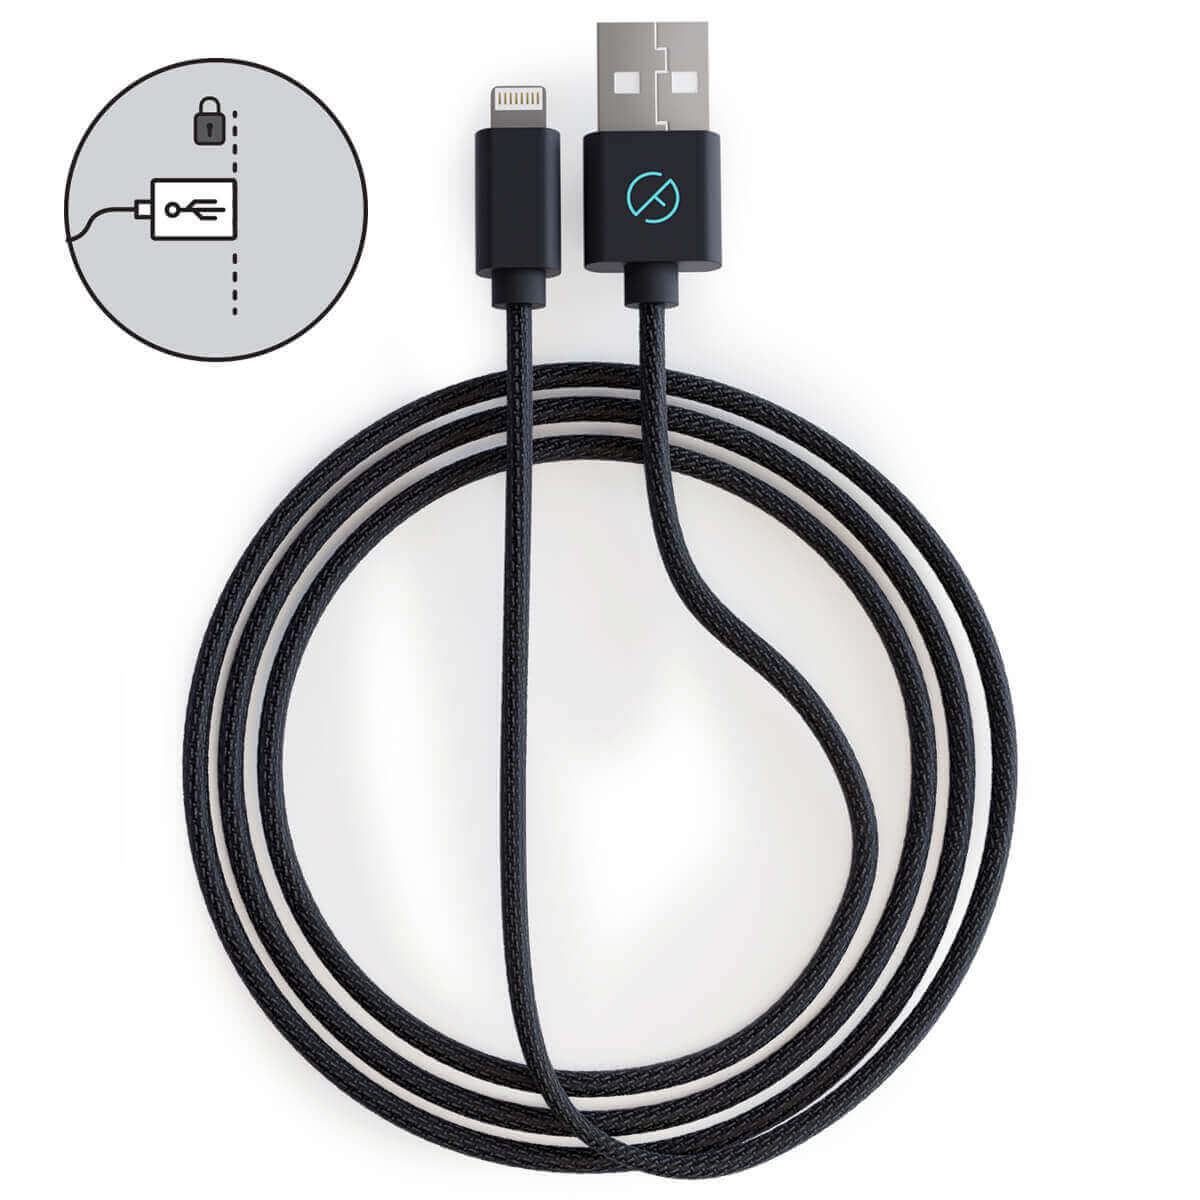 JuiceBack: Data Blocking Charging Cable for iPhones and iPads